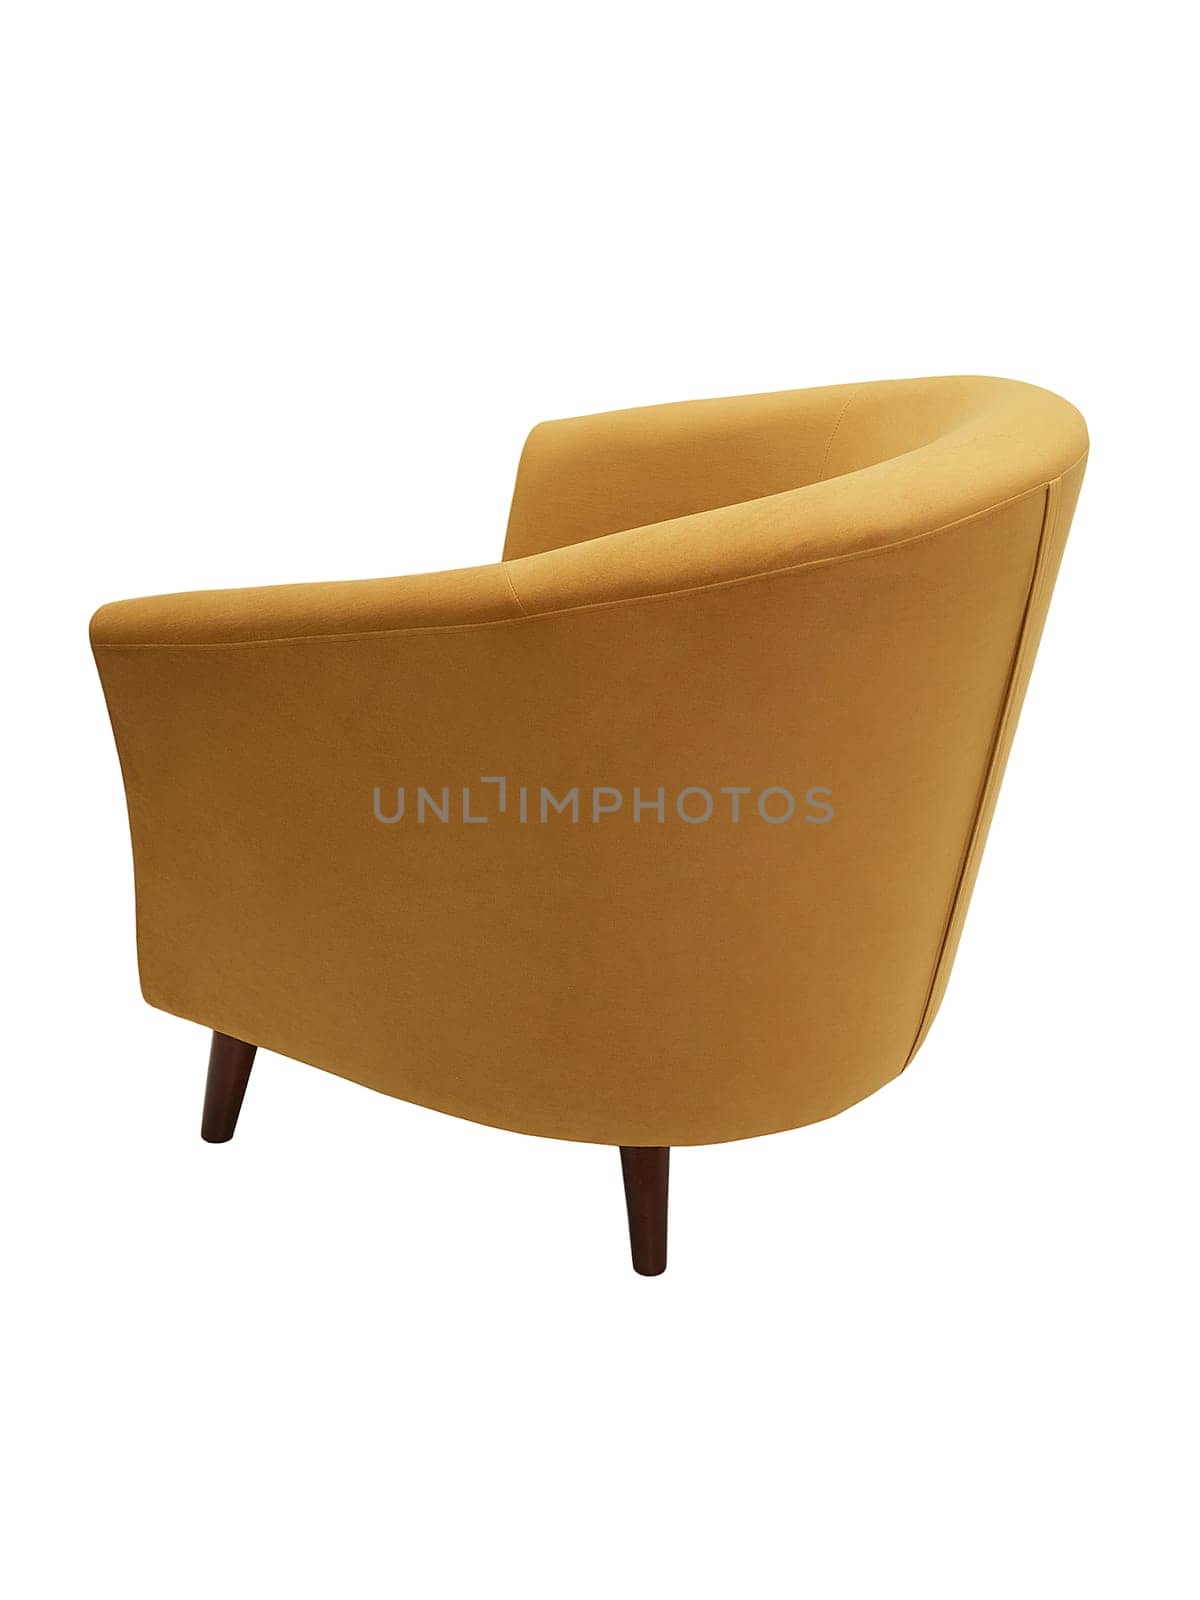 modern orange fabric armchair with wooden legs isolated on white background, back view.